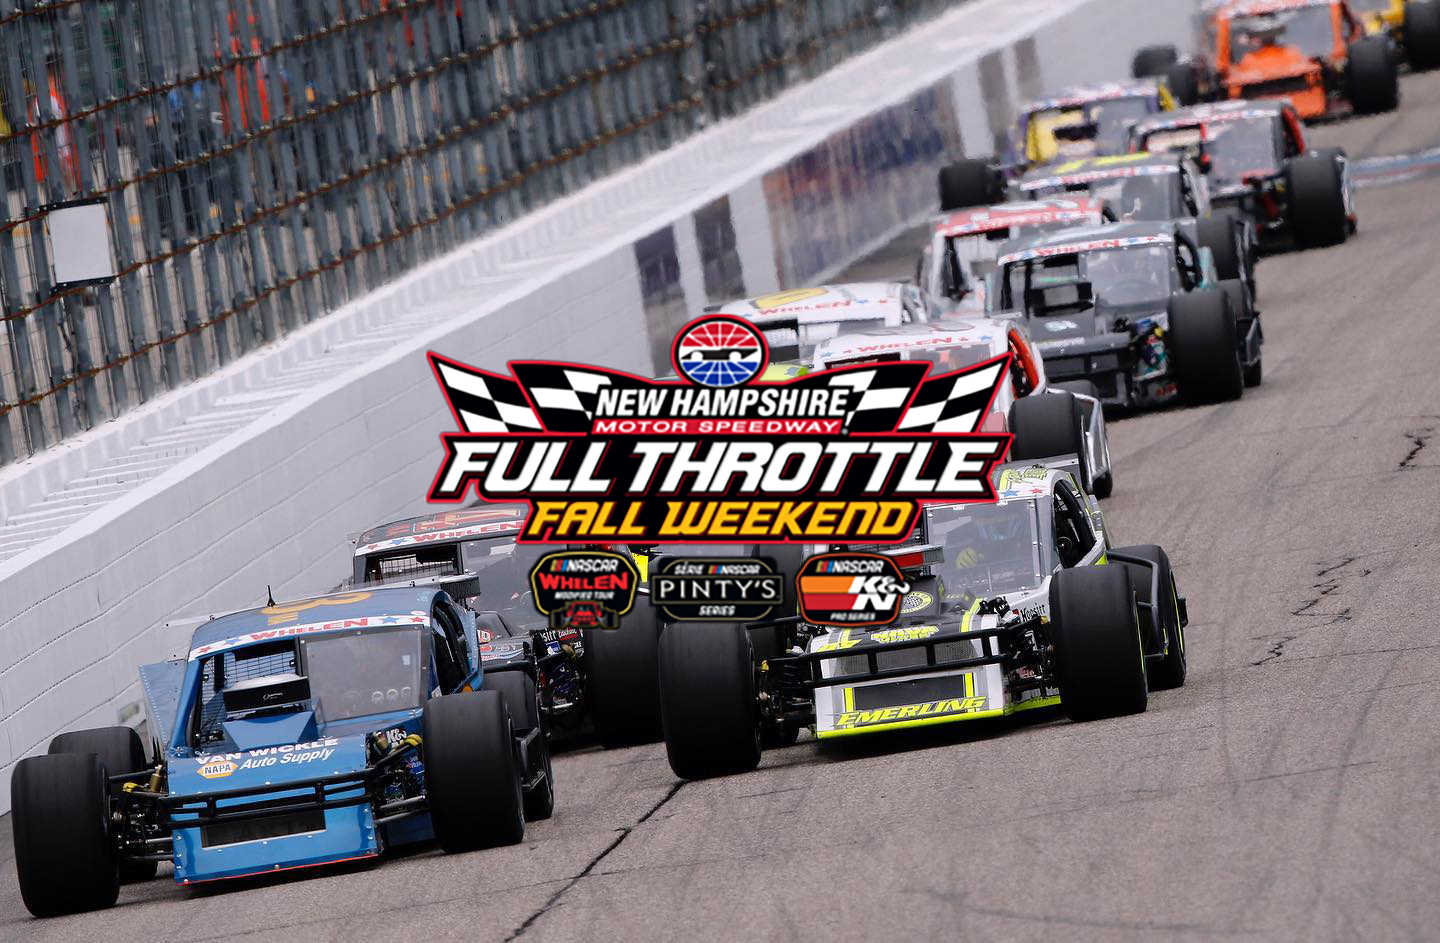 Win 4 Tickets to the Entire Full Throttle Weekend at NHMS!